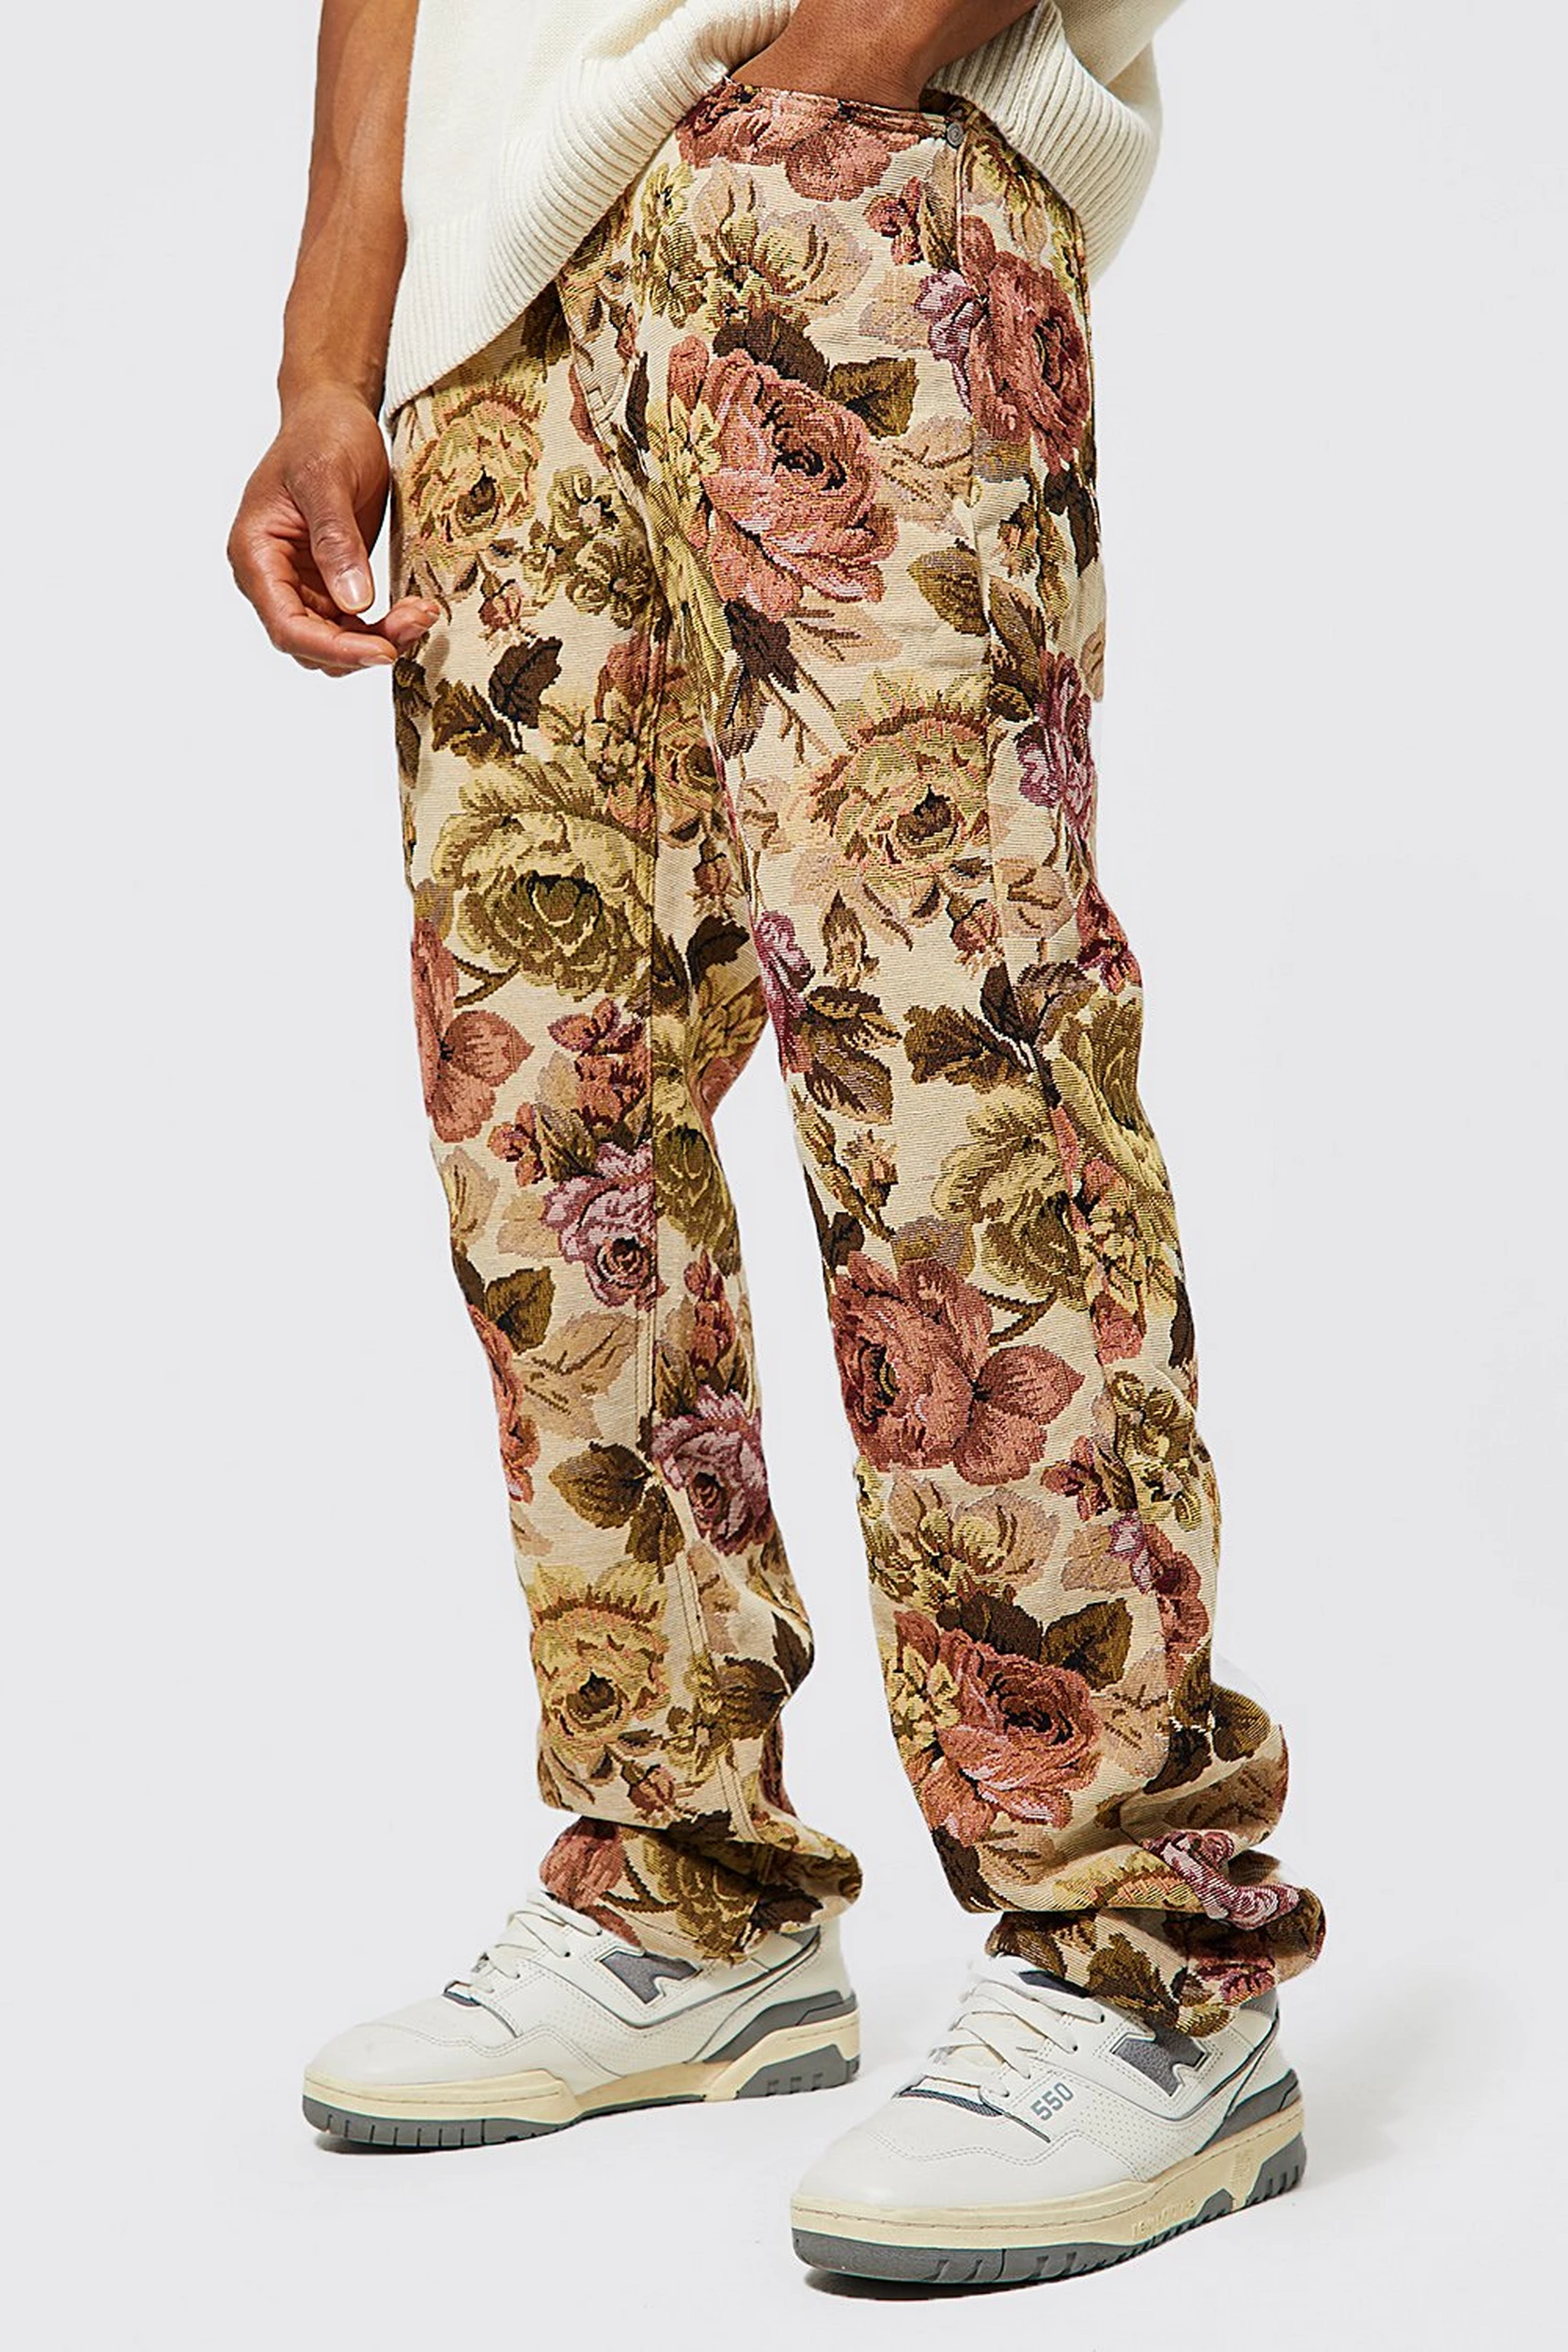 boohooman.com | Relaxed Fit Floral Tapestry Jeans